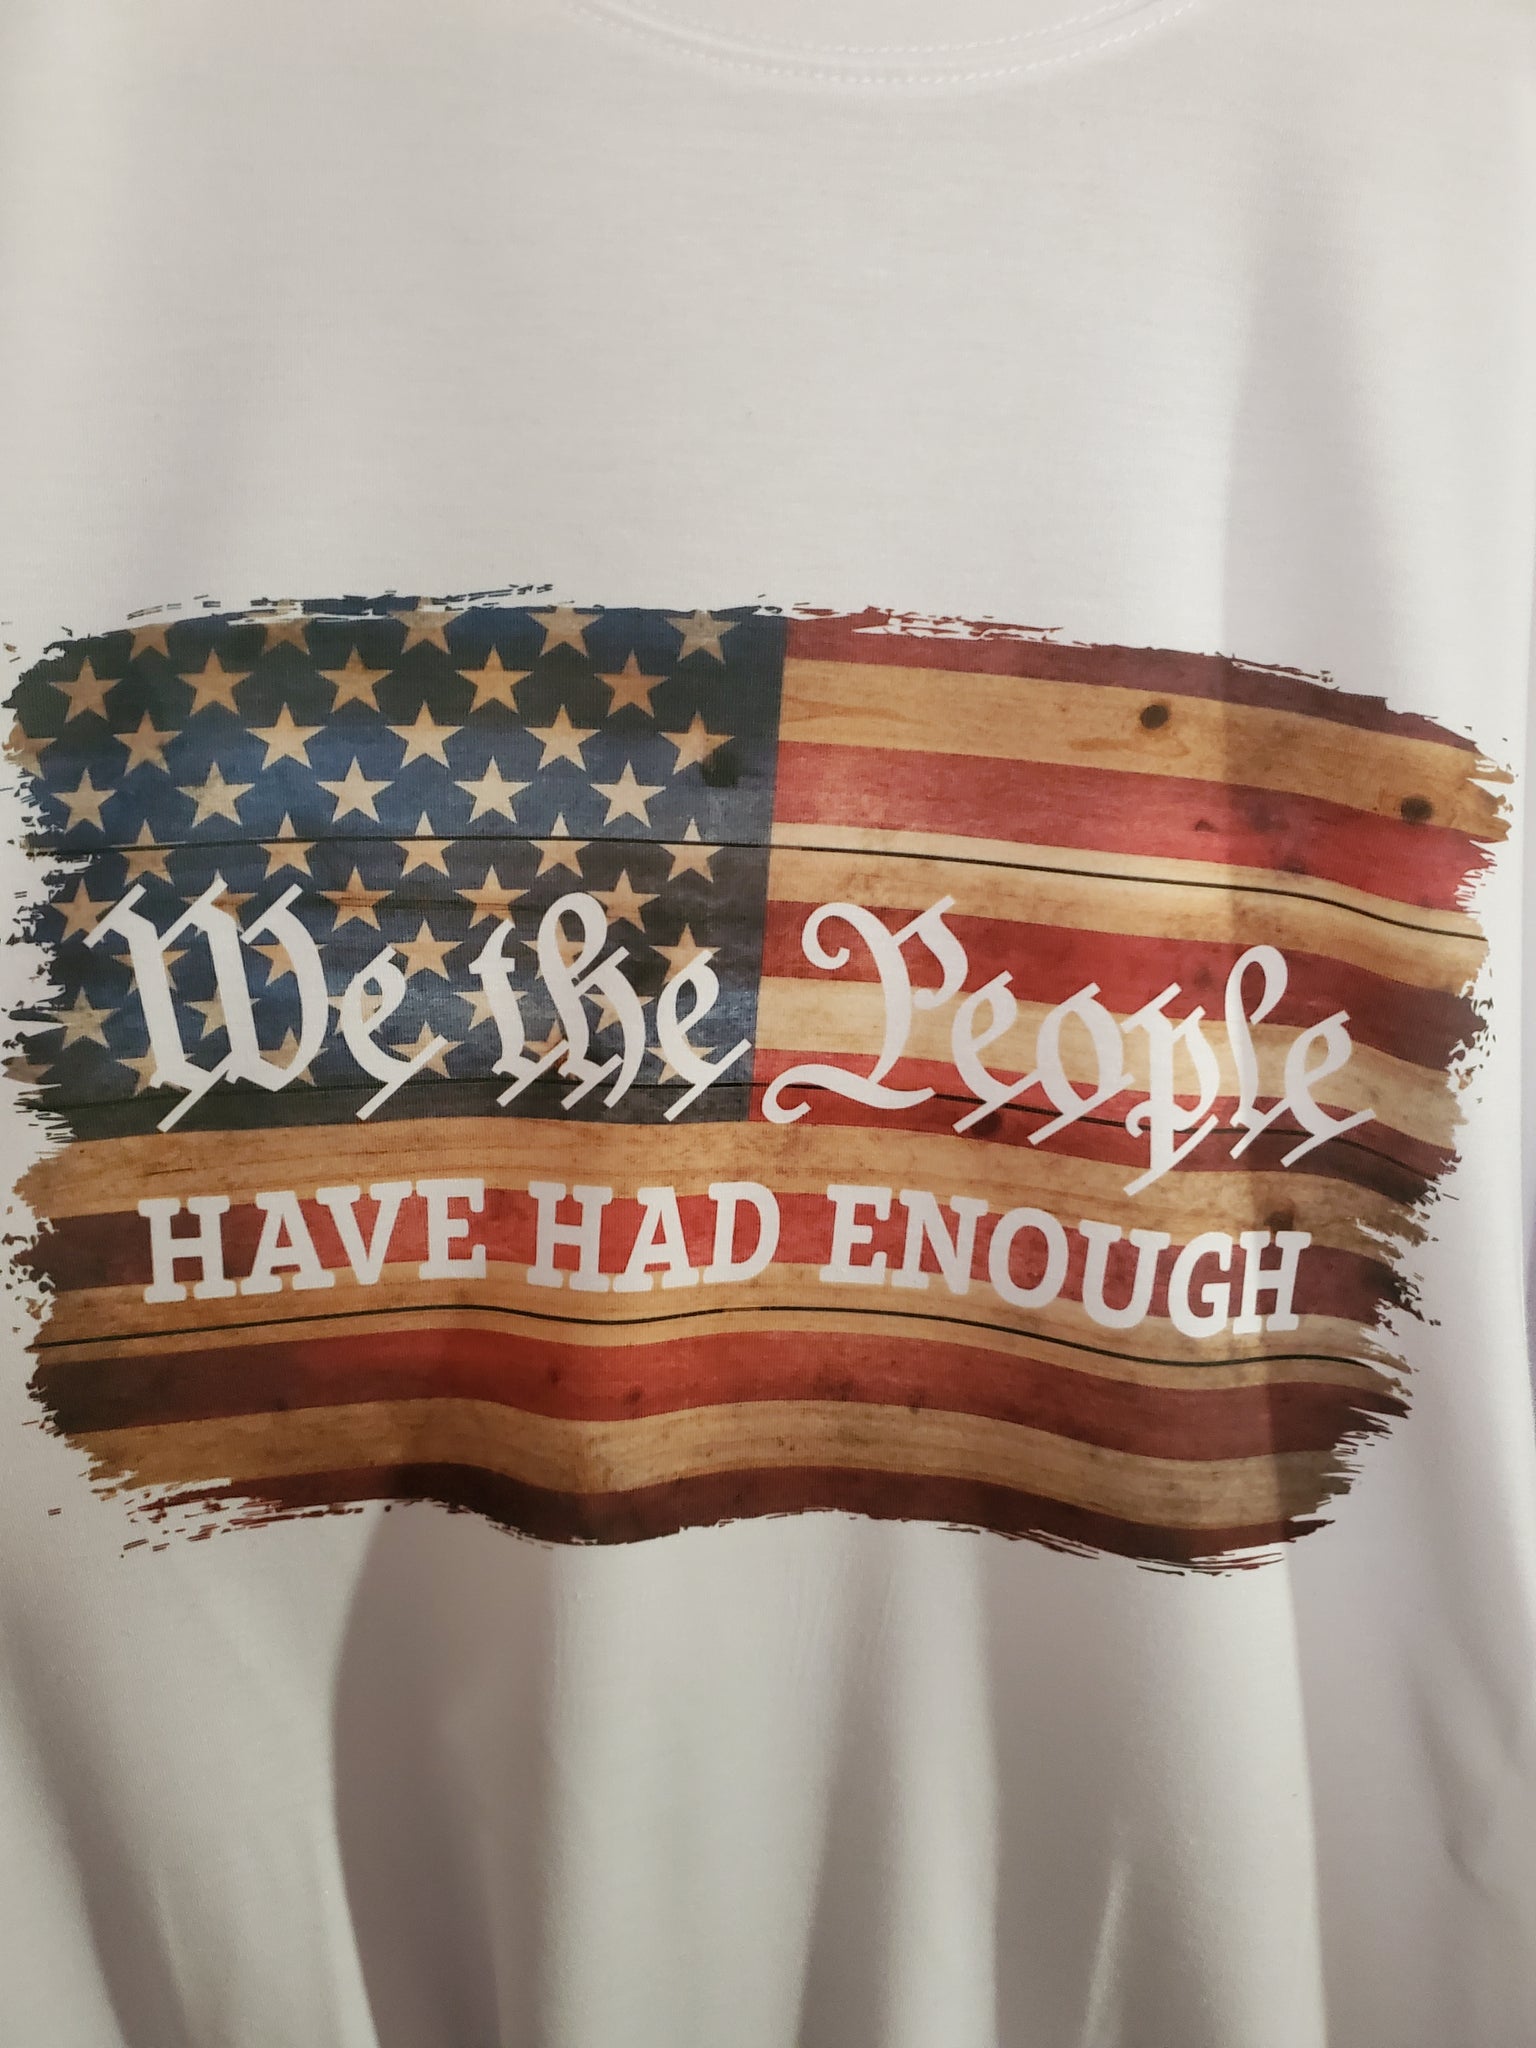 Hand-Sublimated Tee- We The People